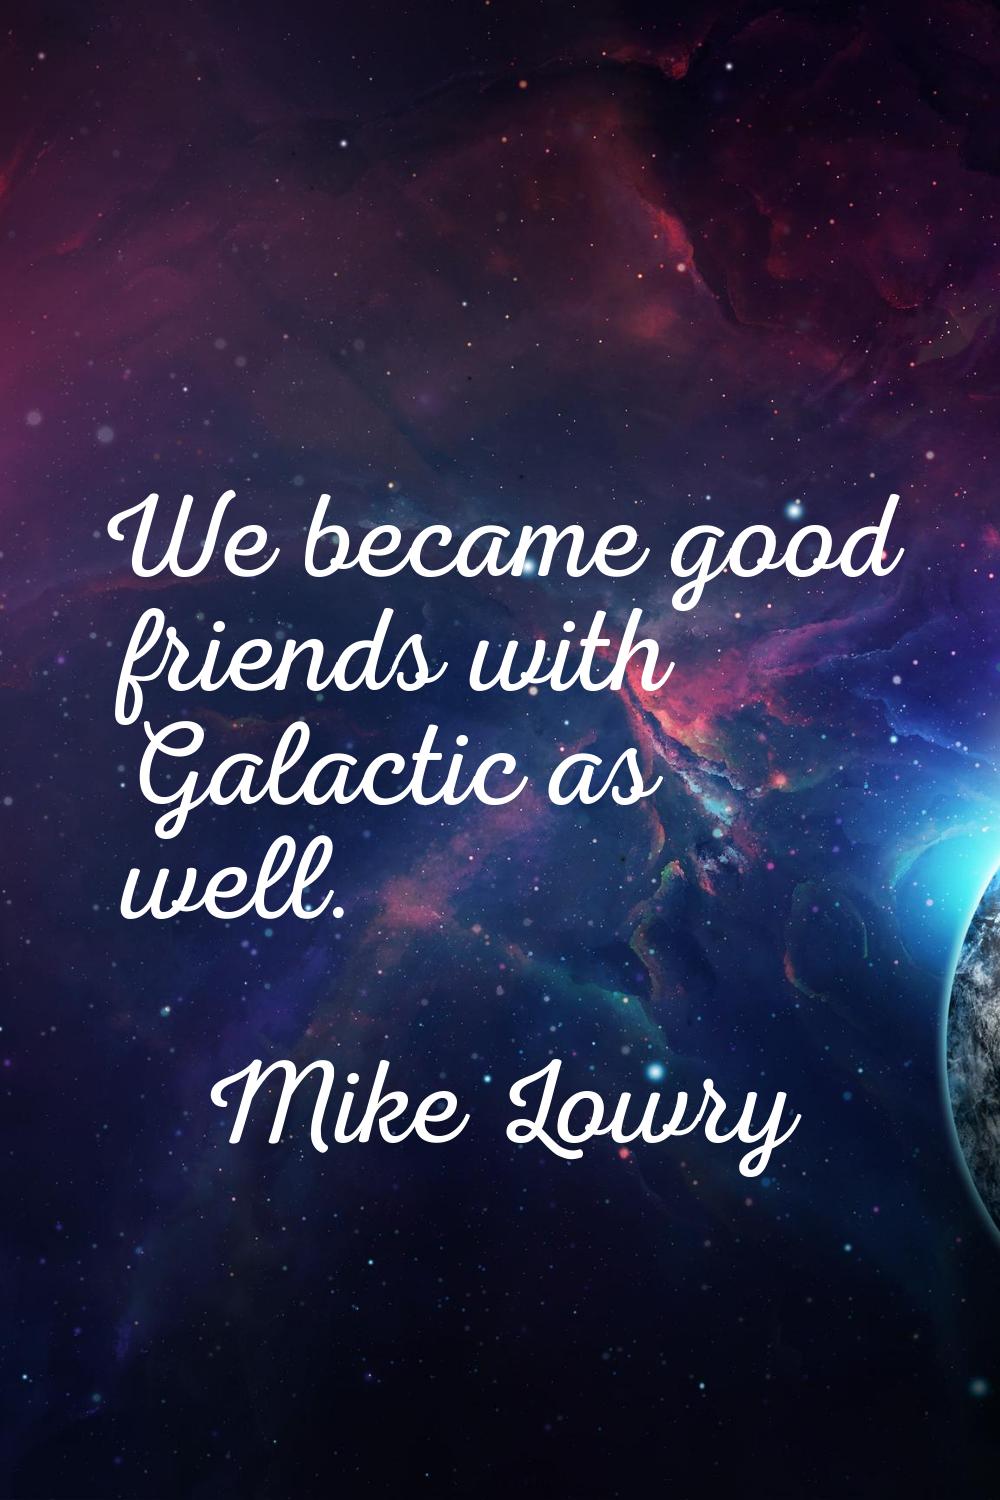 We became good friends with Galactic as well.